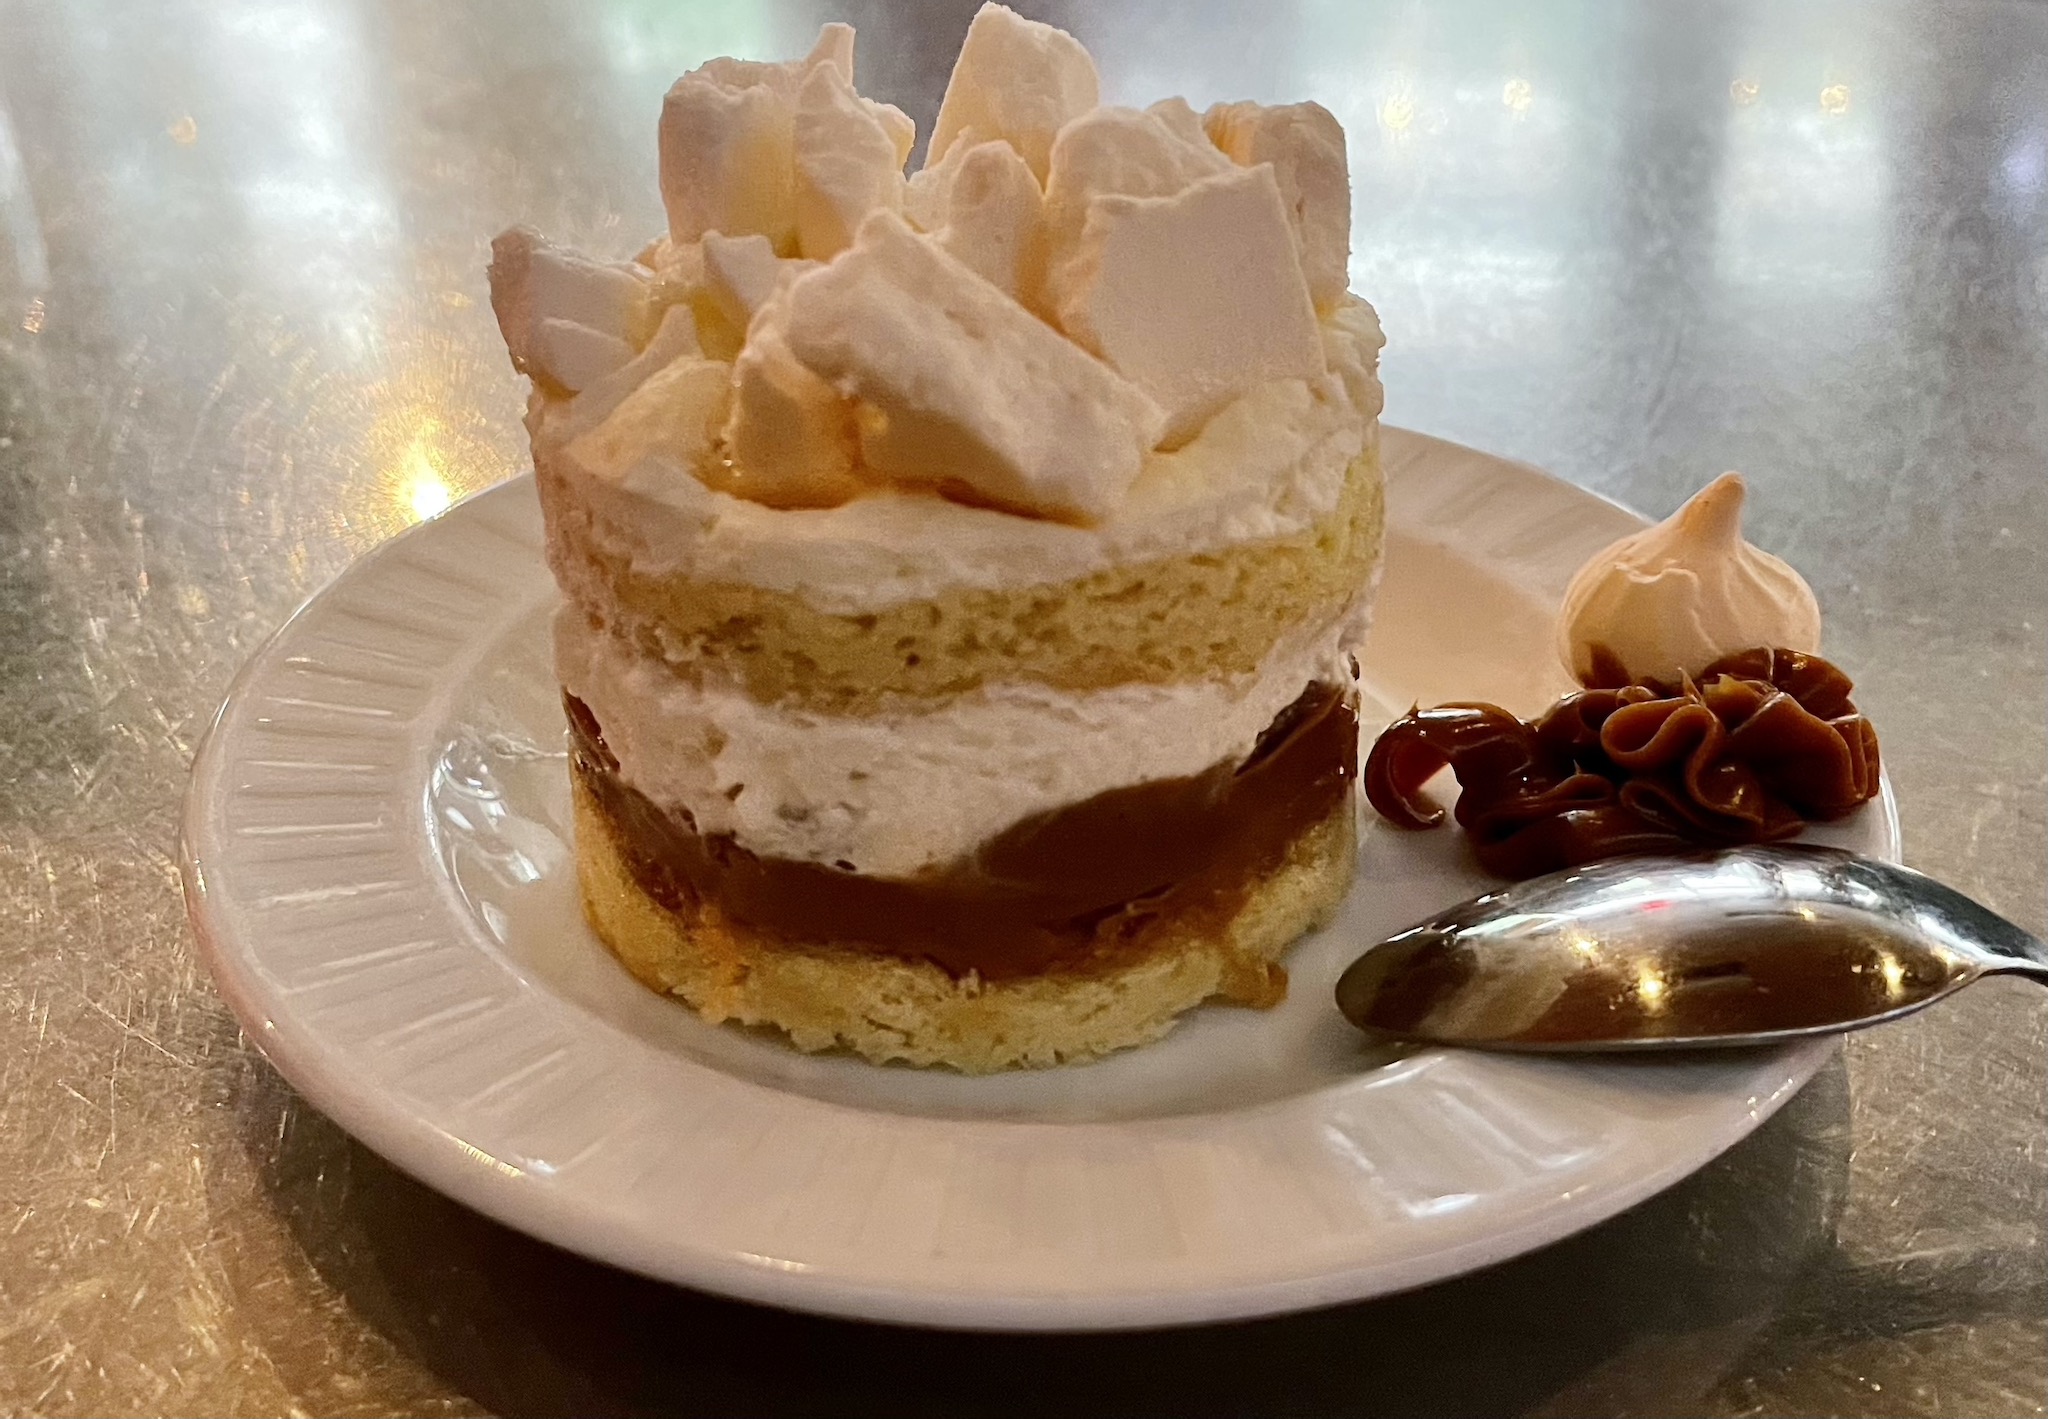 Renzo's Chaja - Renzo's signature dessert. Home-made sponge cake, layered with dulce de leche caramel, peaches and walnuts. Covered in chantilly and topped with meringue crumbles